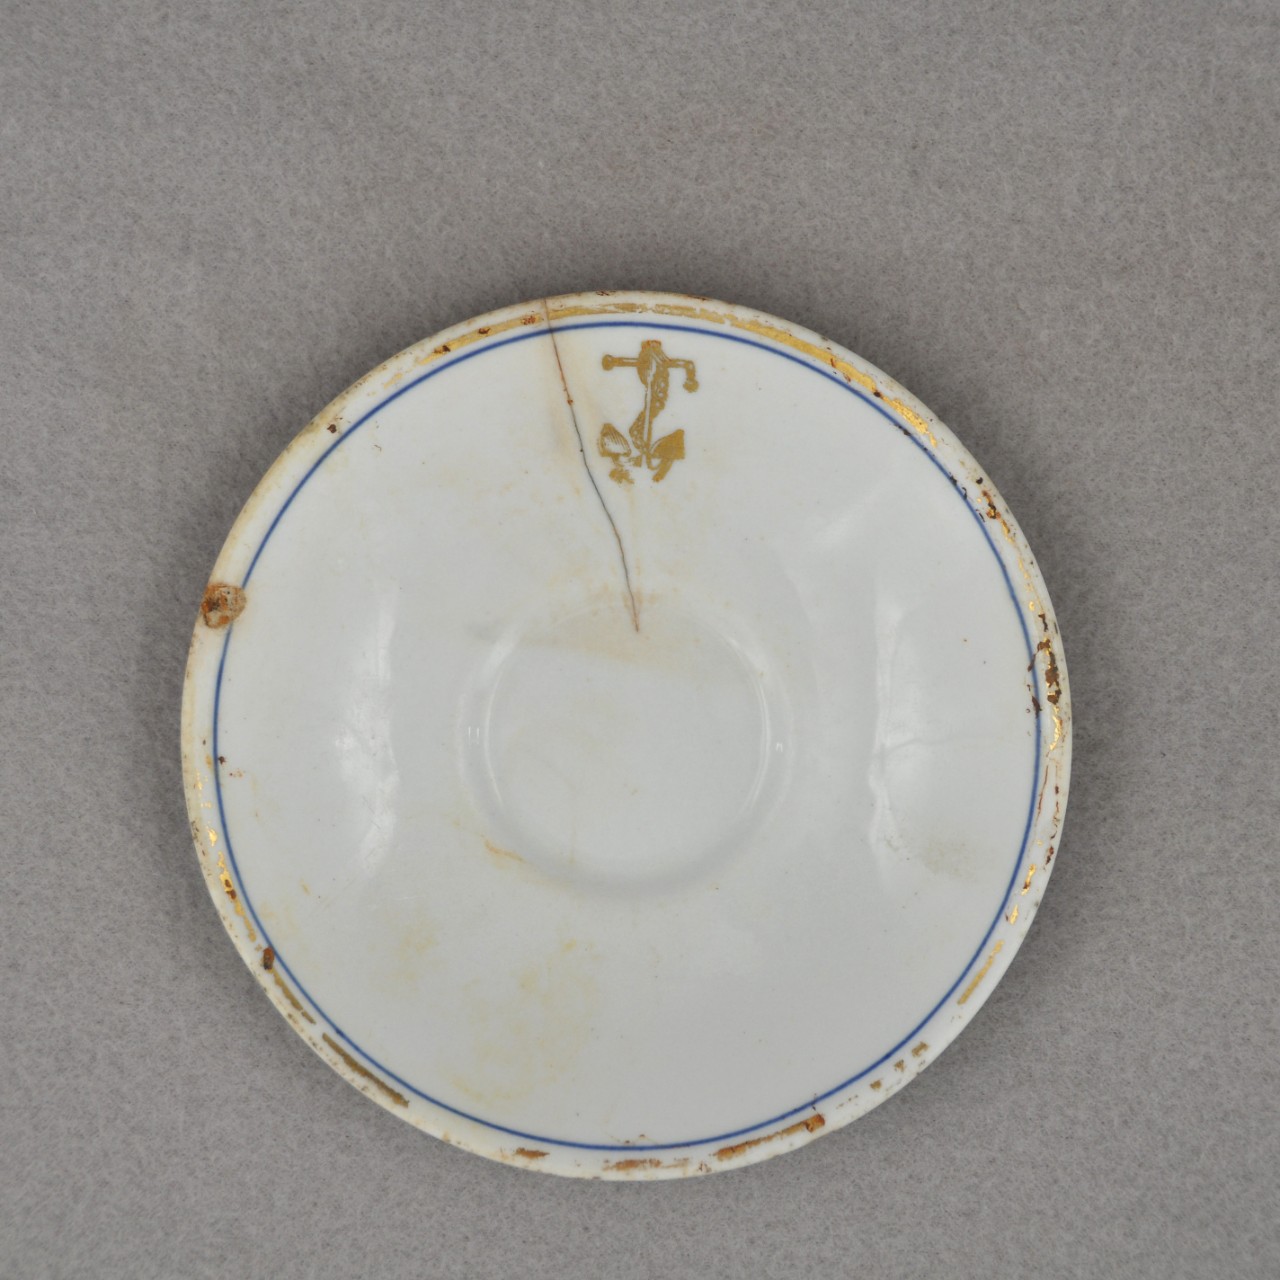 <p>A small white ceramic saucer with a gold and blue ring around the rim. A gold anchor with a chain wrapped around it is located on the lip. Near the anchor is a crack that goes to the middle of the saucer.</p>